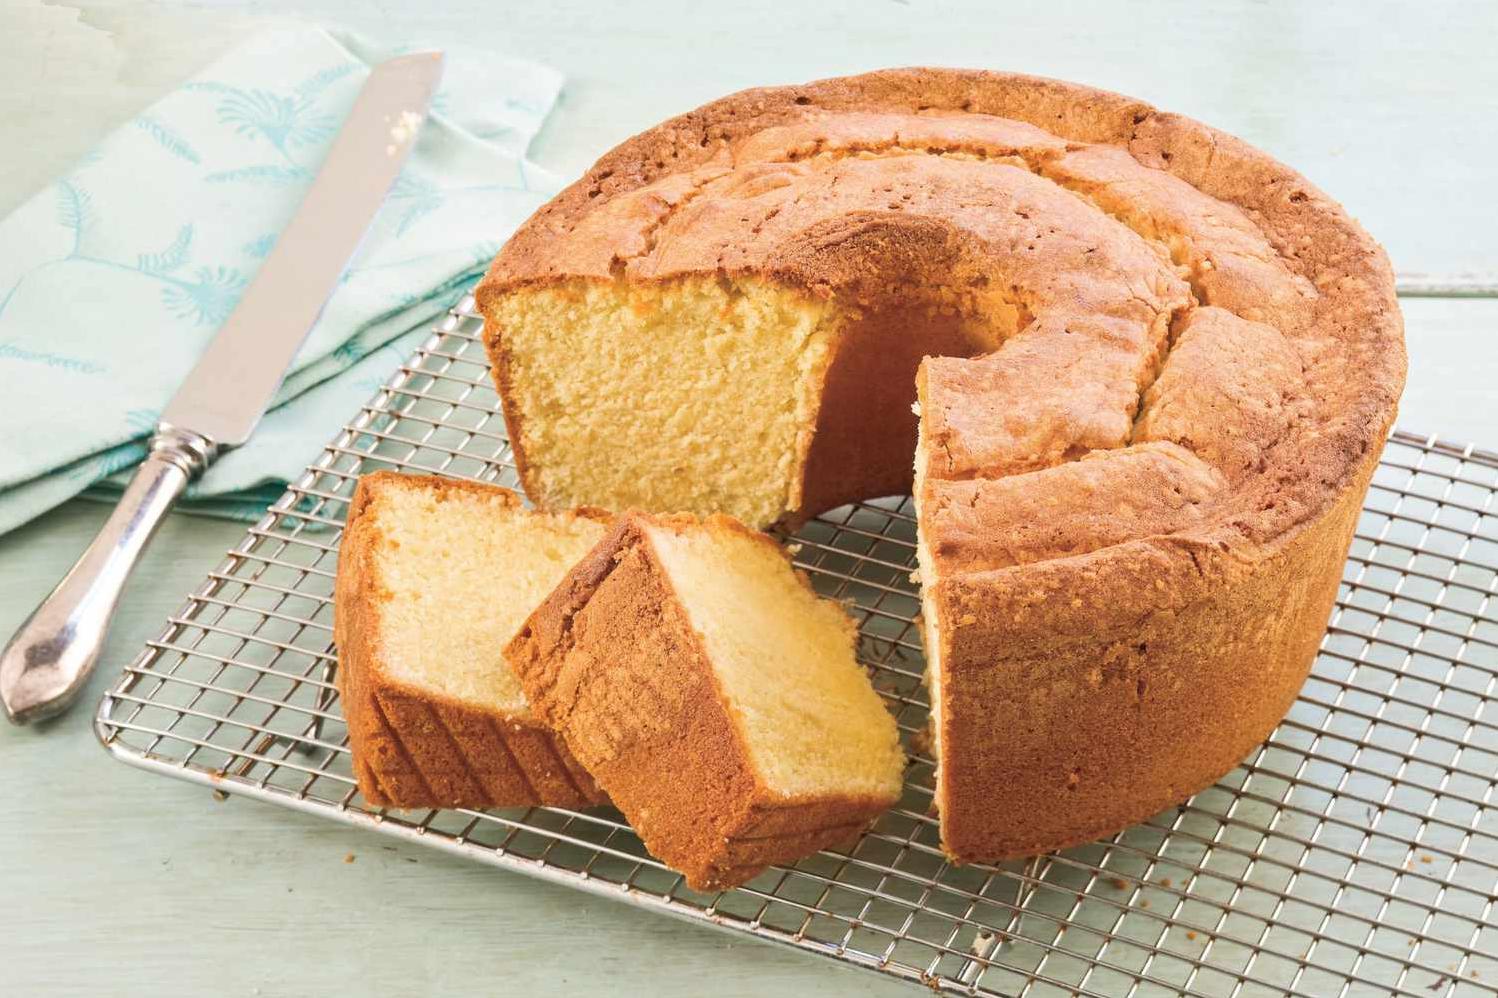  Pound cake: the perfect base for your favorite seasonal fruits.